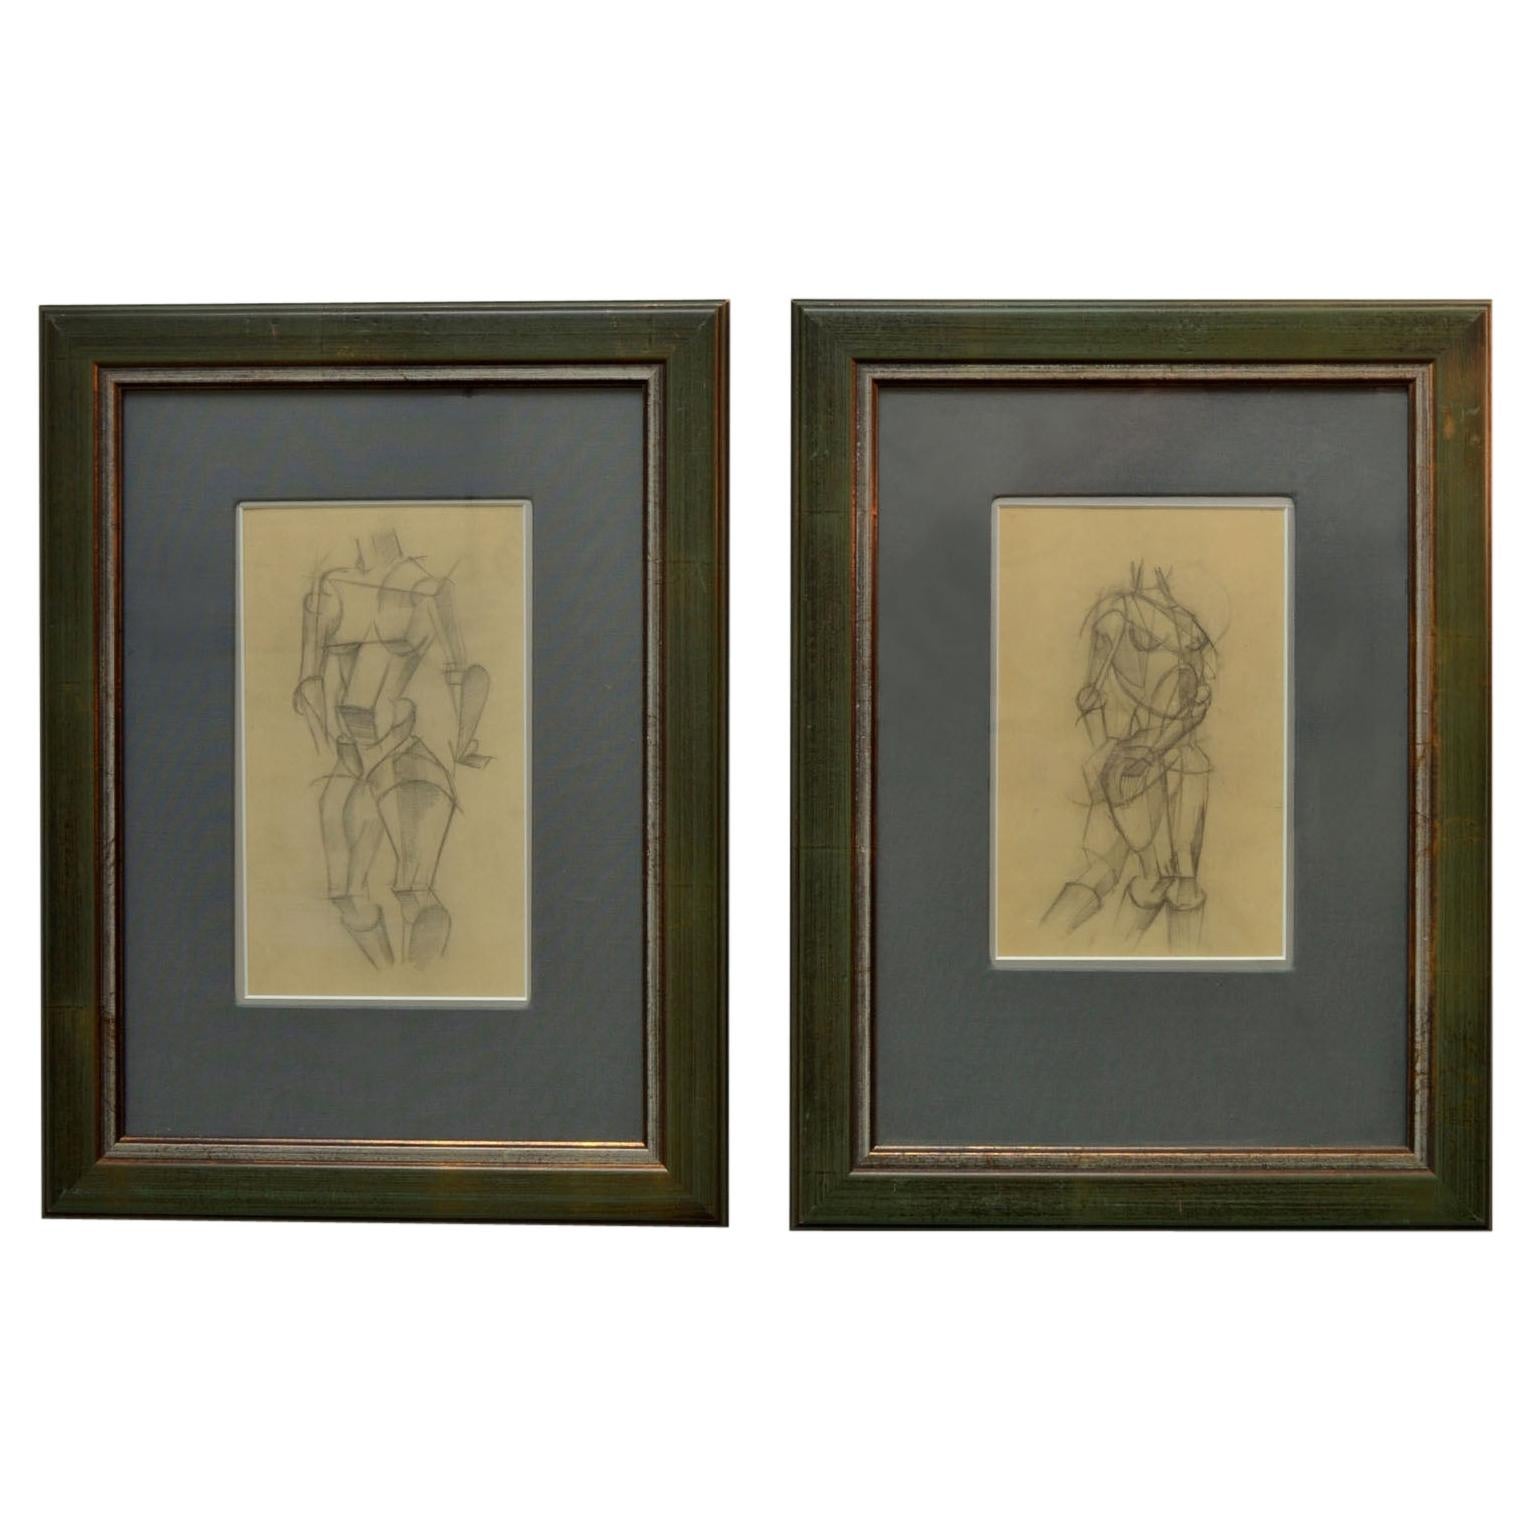 Set of Female Studies of Early 20th Century Life Drawings in Cubist Style